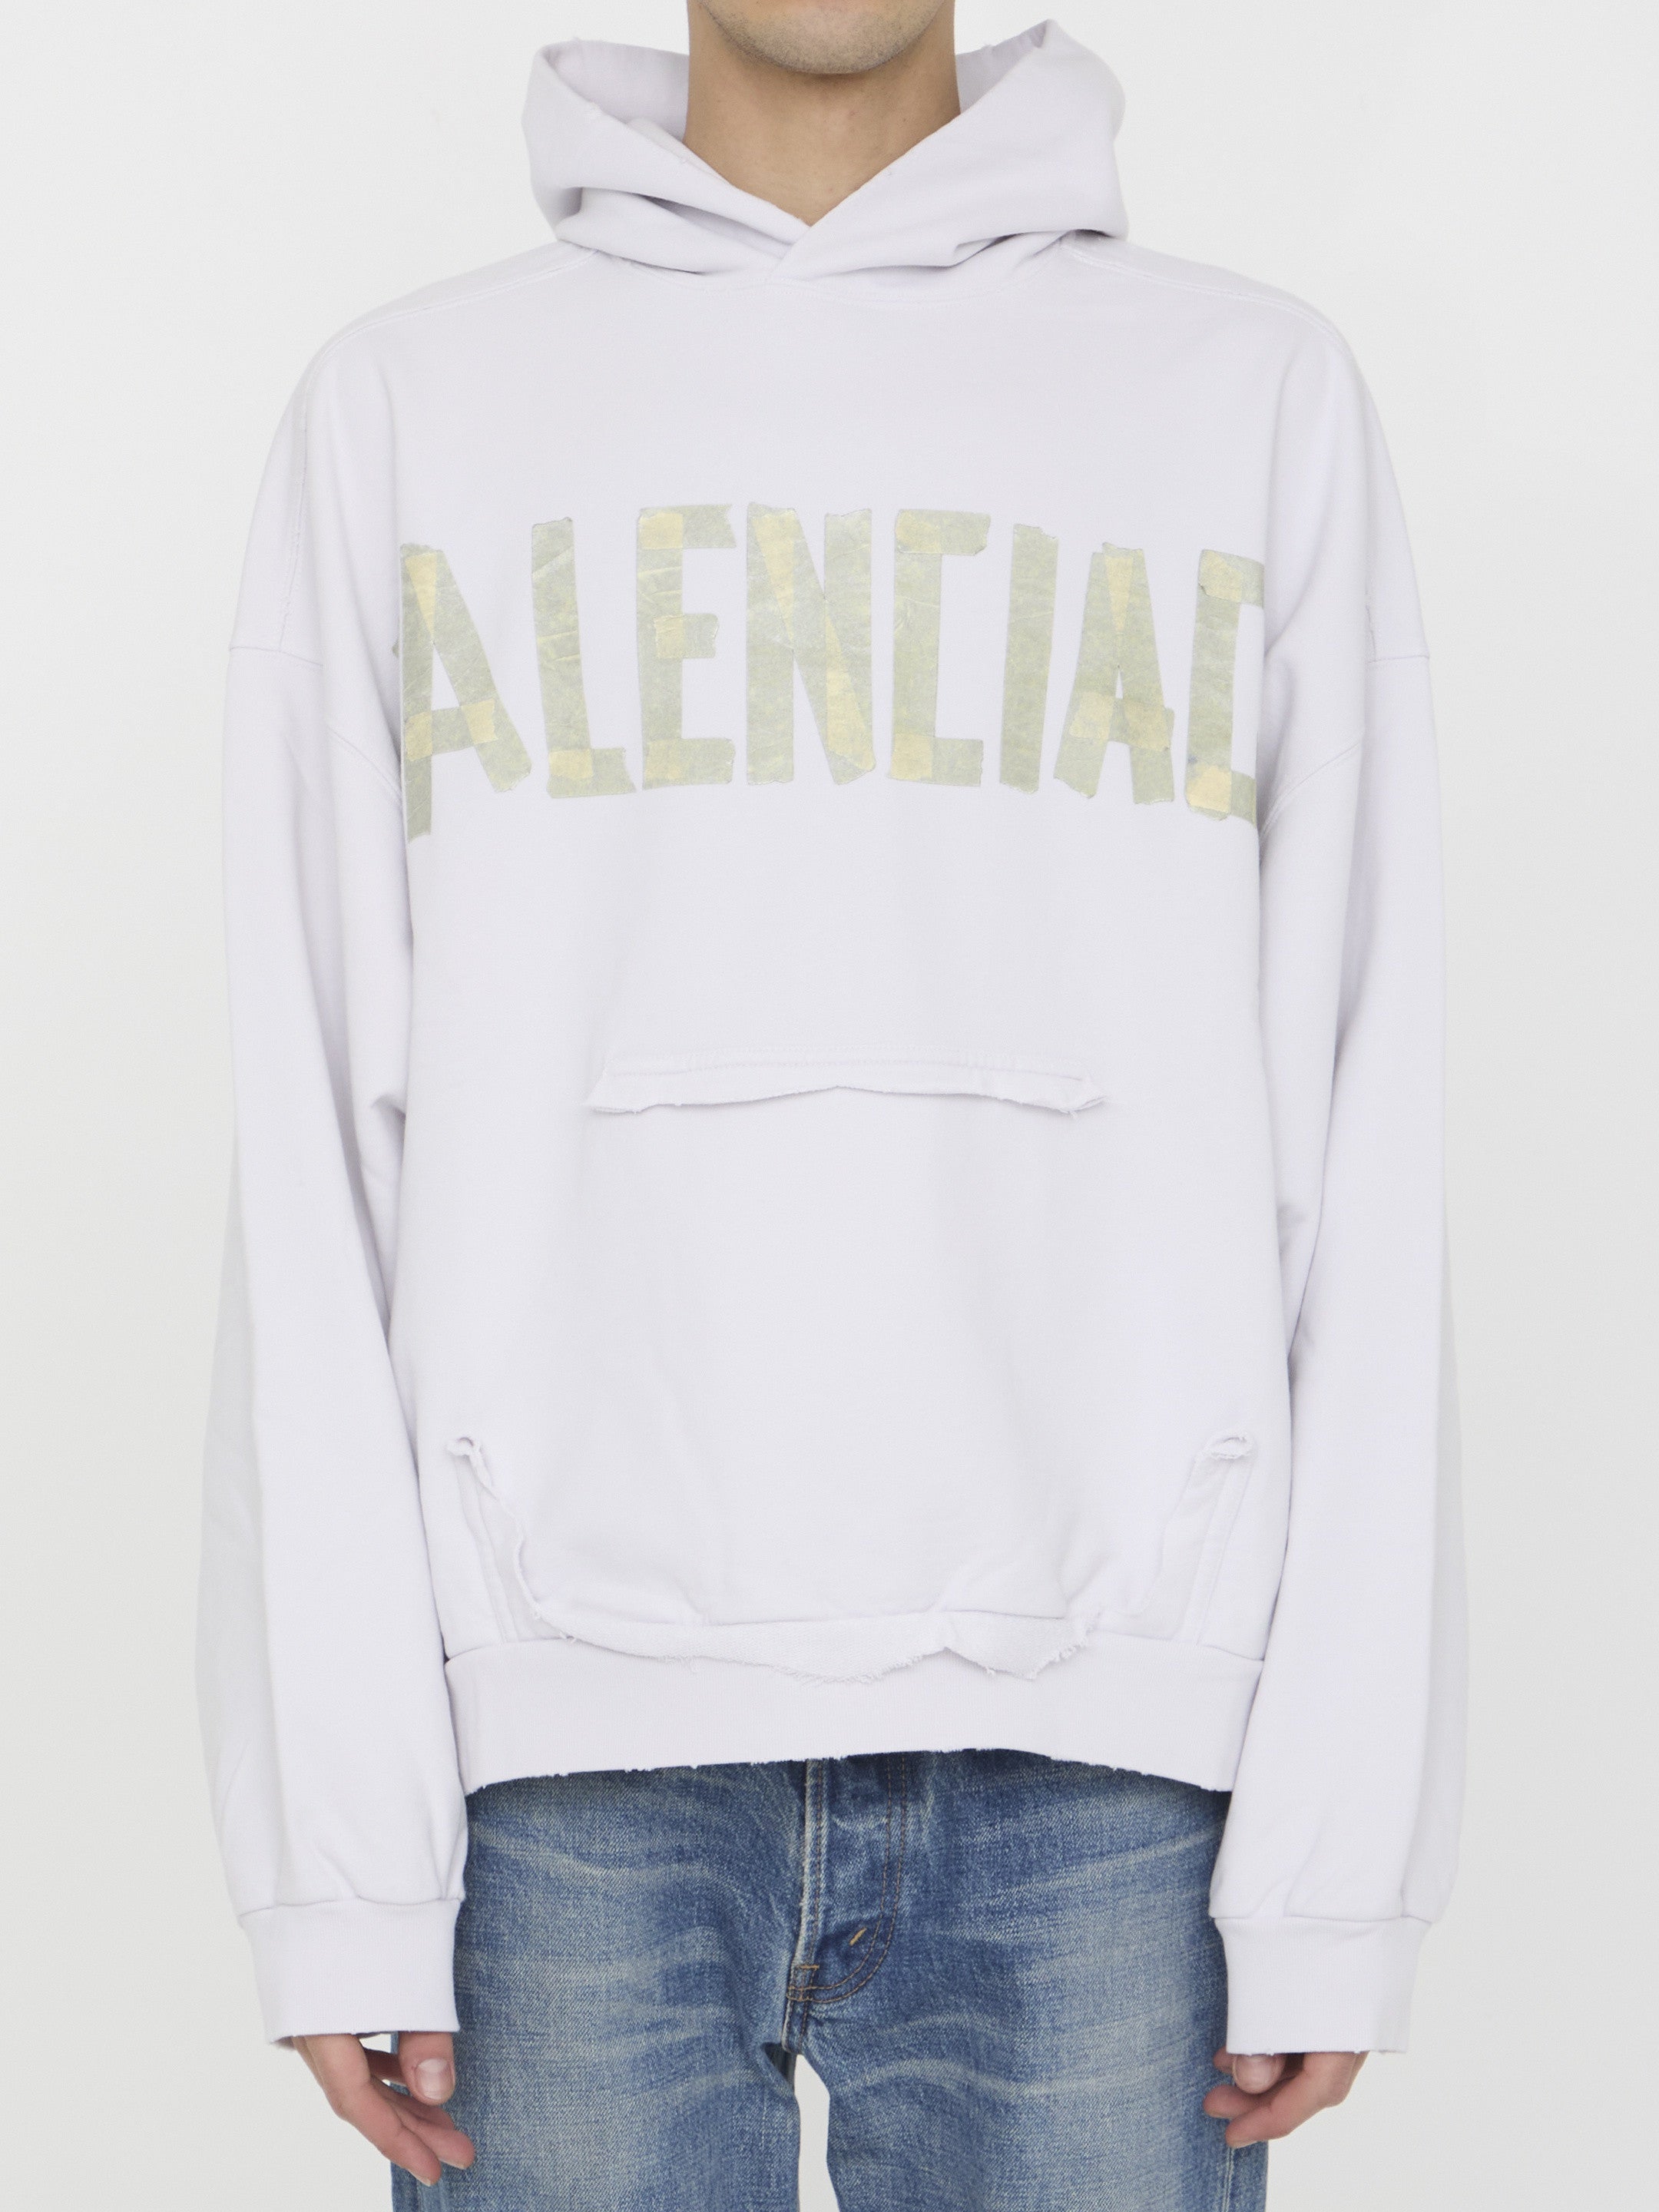 BALENCIAGA-OUTLET-SALE-Ripped-Pocket-Tape-Type-hoodie-Strick-L-WHITE-ARCHIVE-COLLECTION.jpg